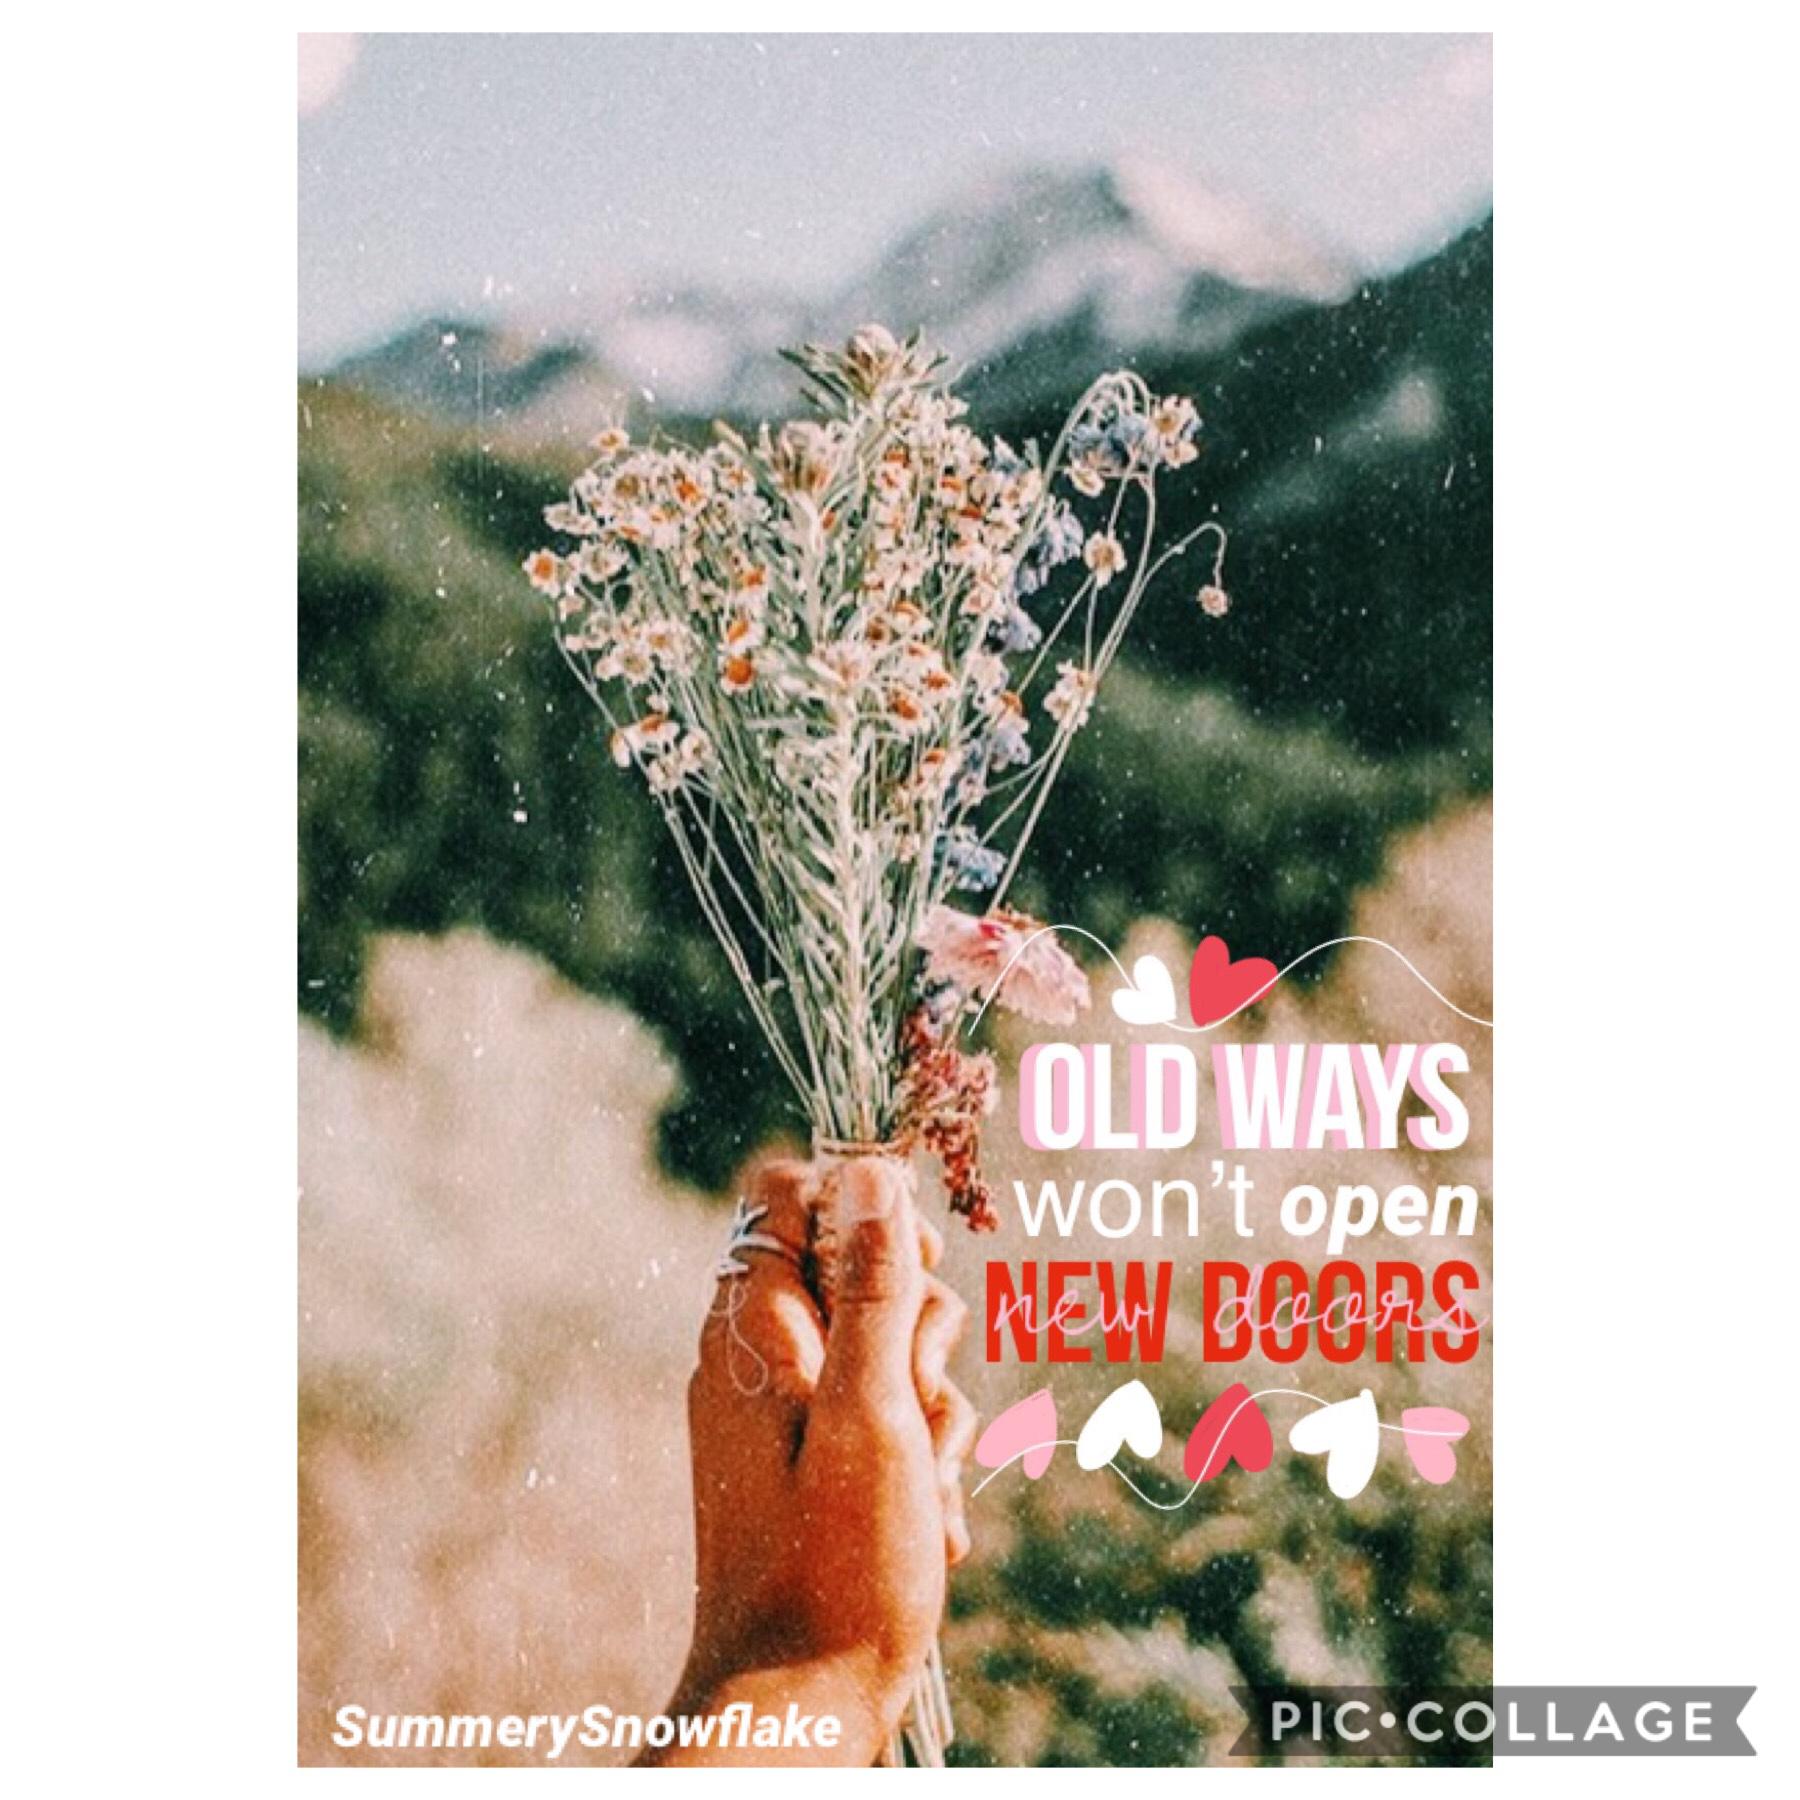 « Old ways won’t open new doors »
Photo : alexgowon (Instagram)
-
-
-
Love - photography - red - pink - white - flowers - bouquet - Birthday - landscape - paysage - fleurs - cute - green - rose - hand.